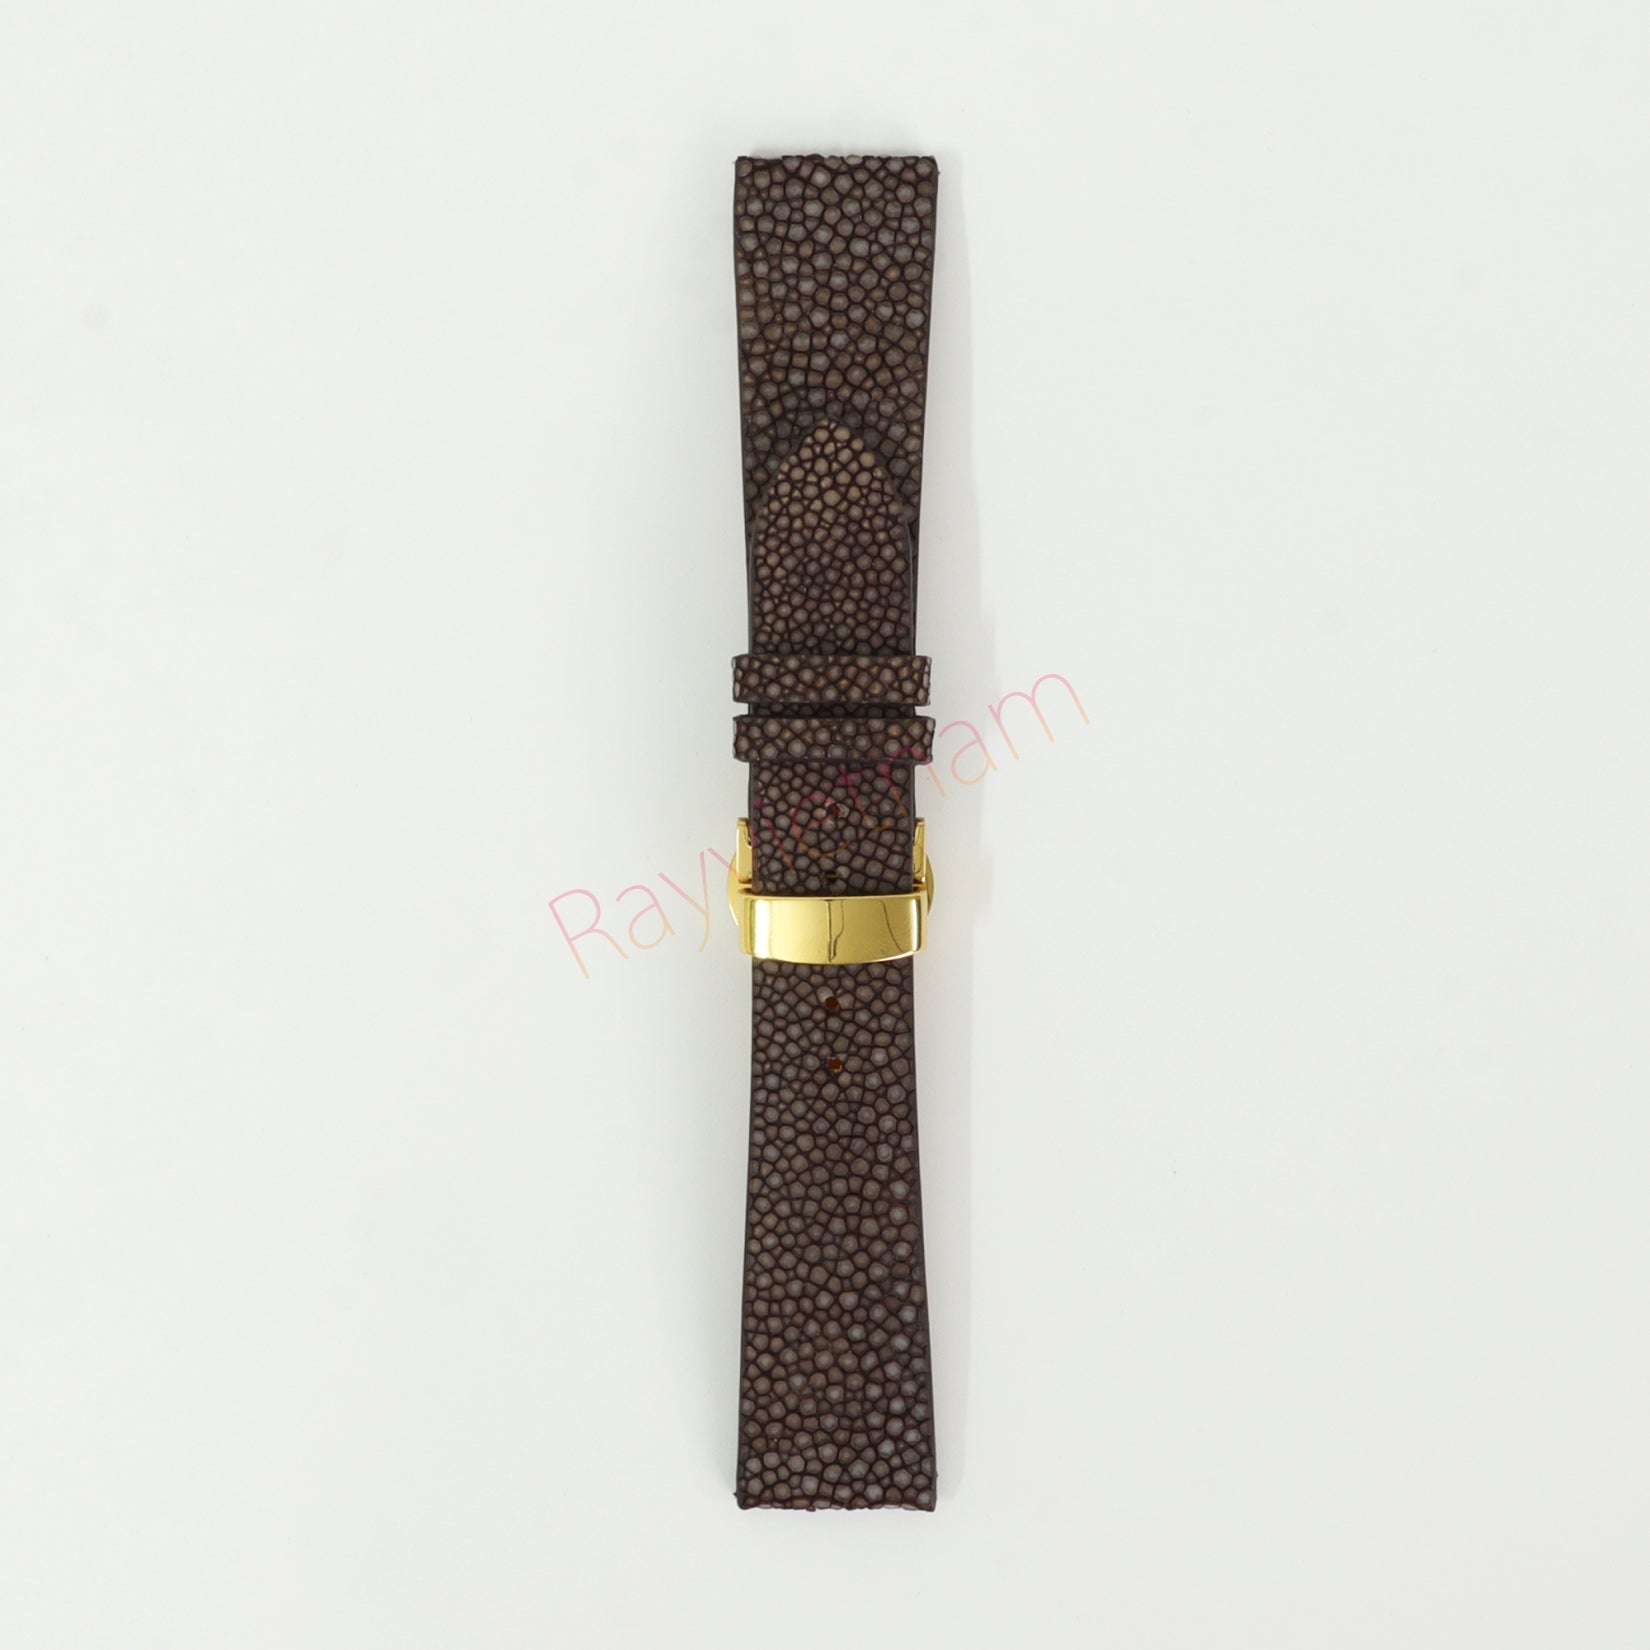 Genuine Stingray Leather Watch Straps With Deployant Clasp, Leather Watch Bands Quick Release Pins, Handmade Leather Watch Strap